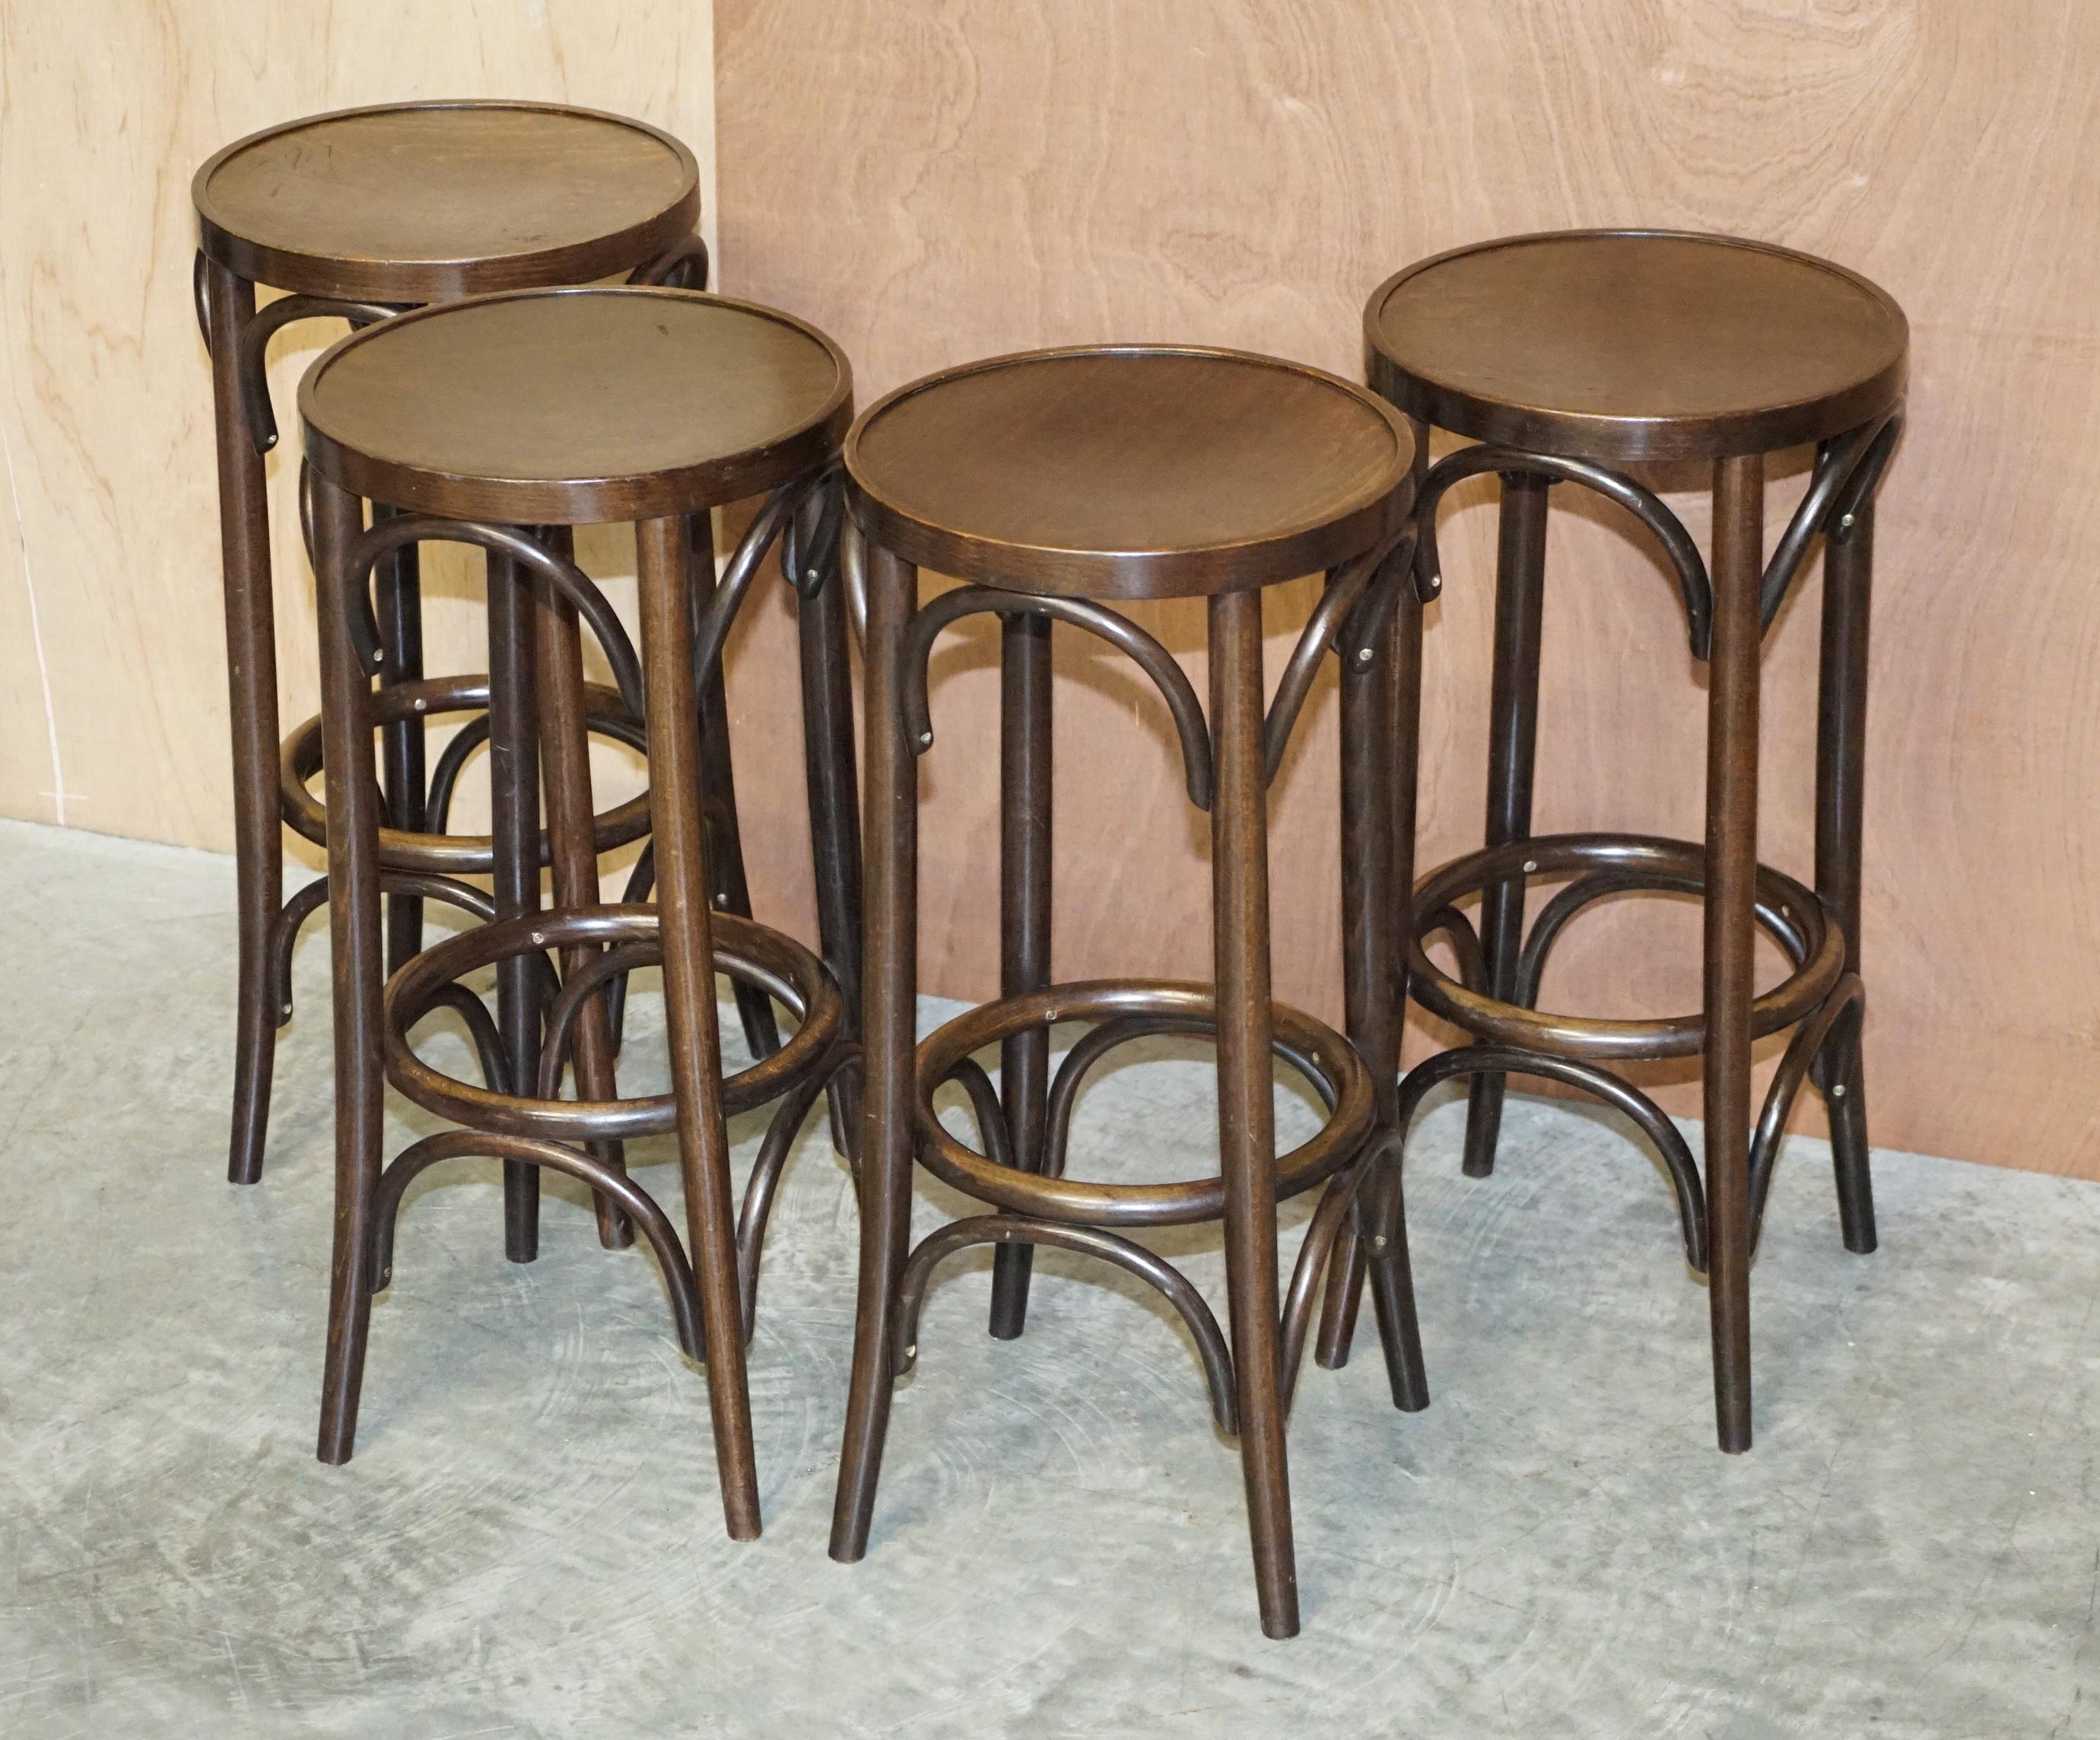 We are delighted to offer this lovely suite of four vintage Thonet bentwood with plywood seats bar stools

These stools are very utilitarian and extremely comfortable, the design is timeless and classic, they look sophisticated in any